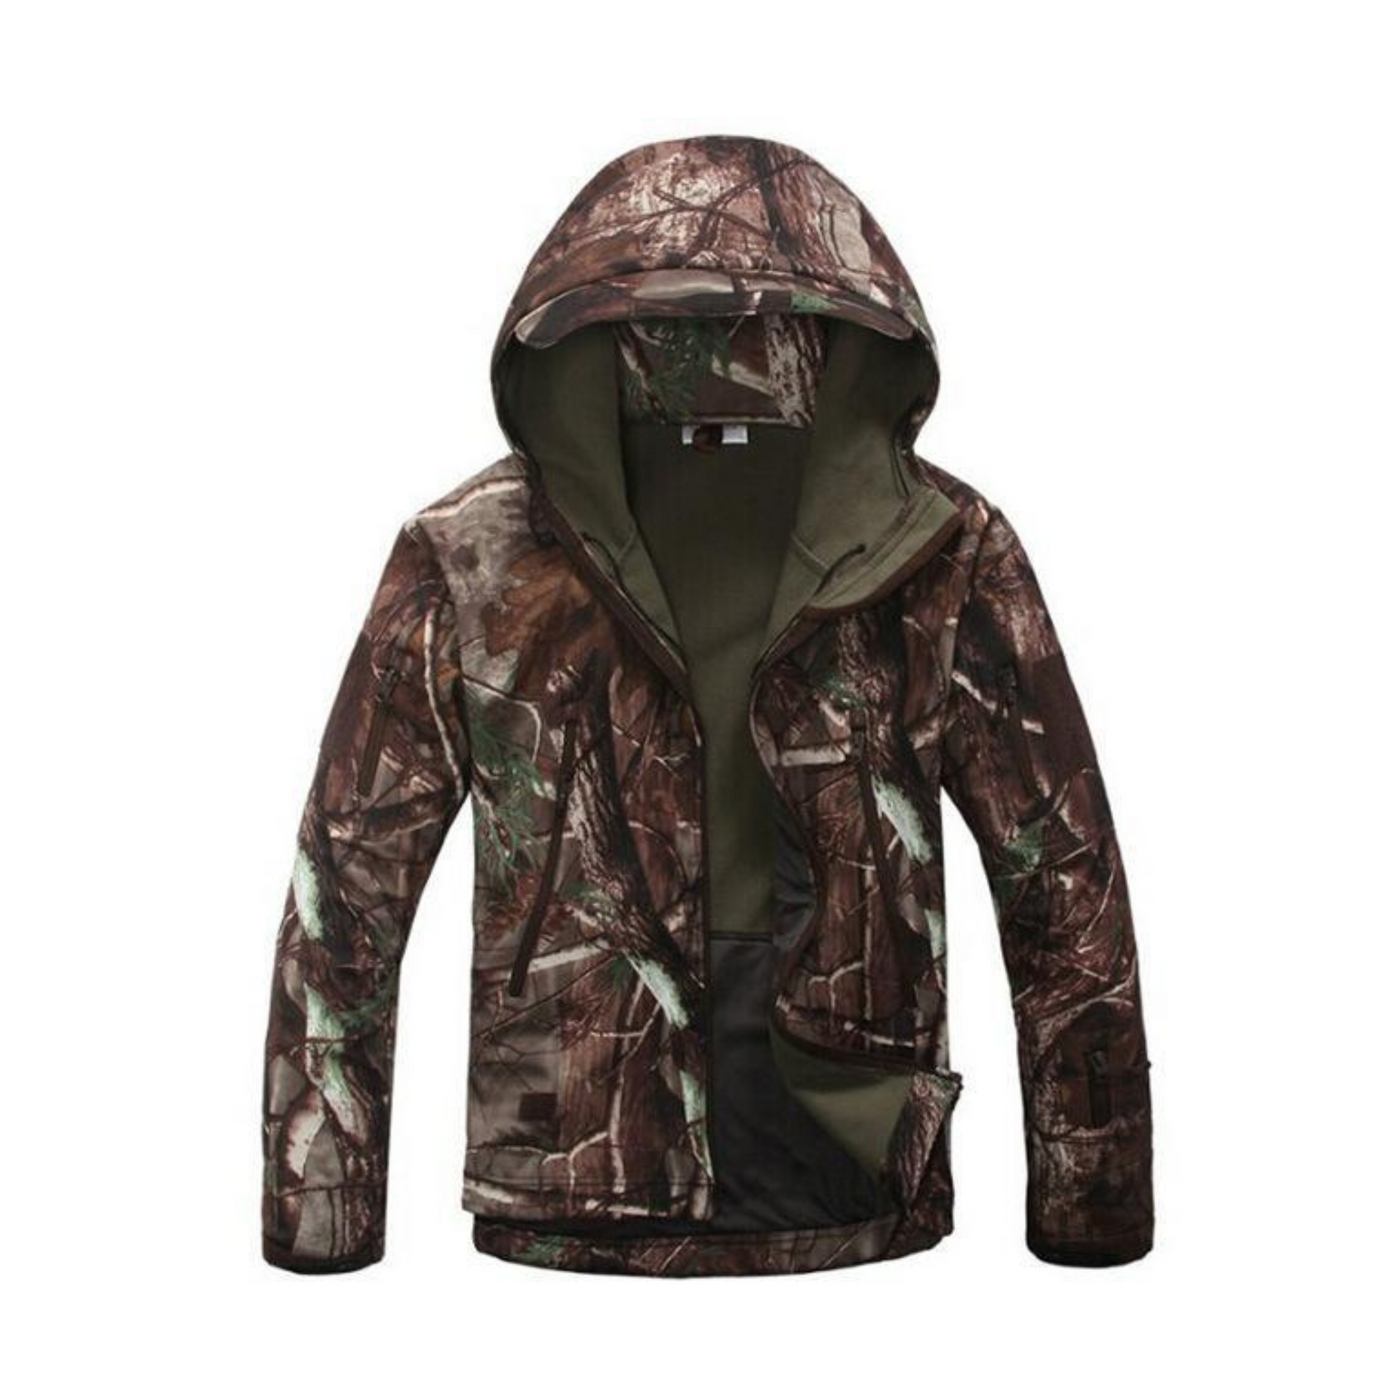 Men's Outdoor Softshell Jackets and Pants for Hiking and Hunting - TAD Gear